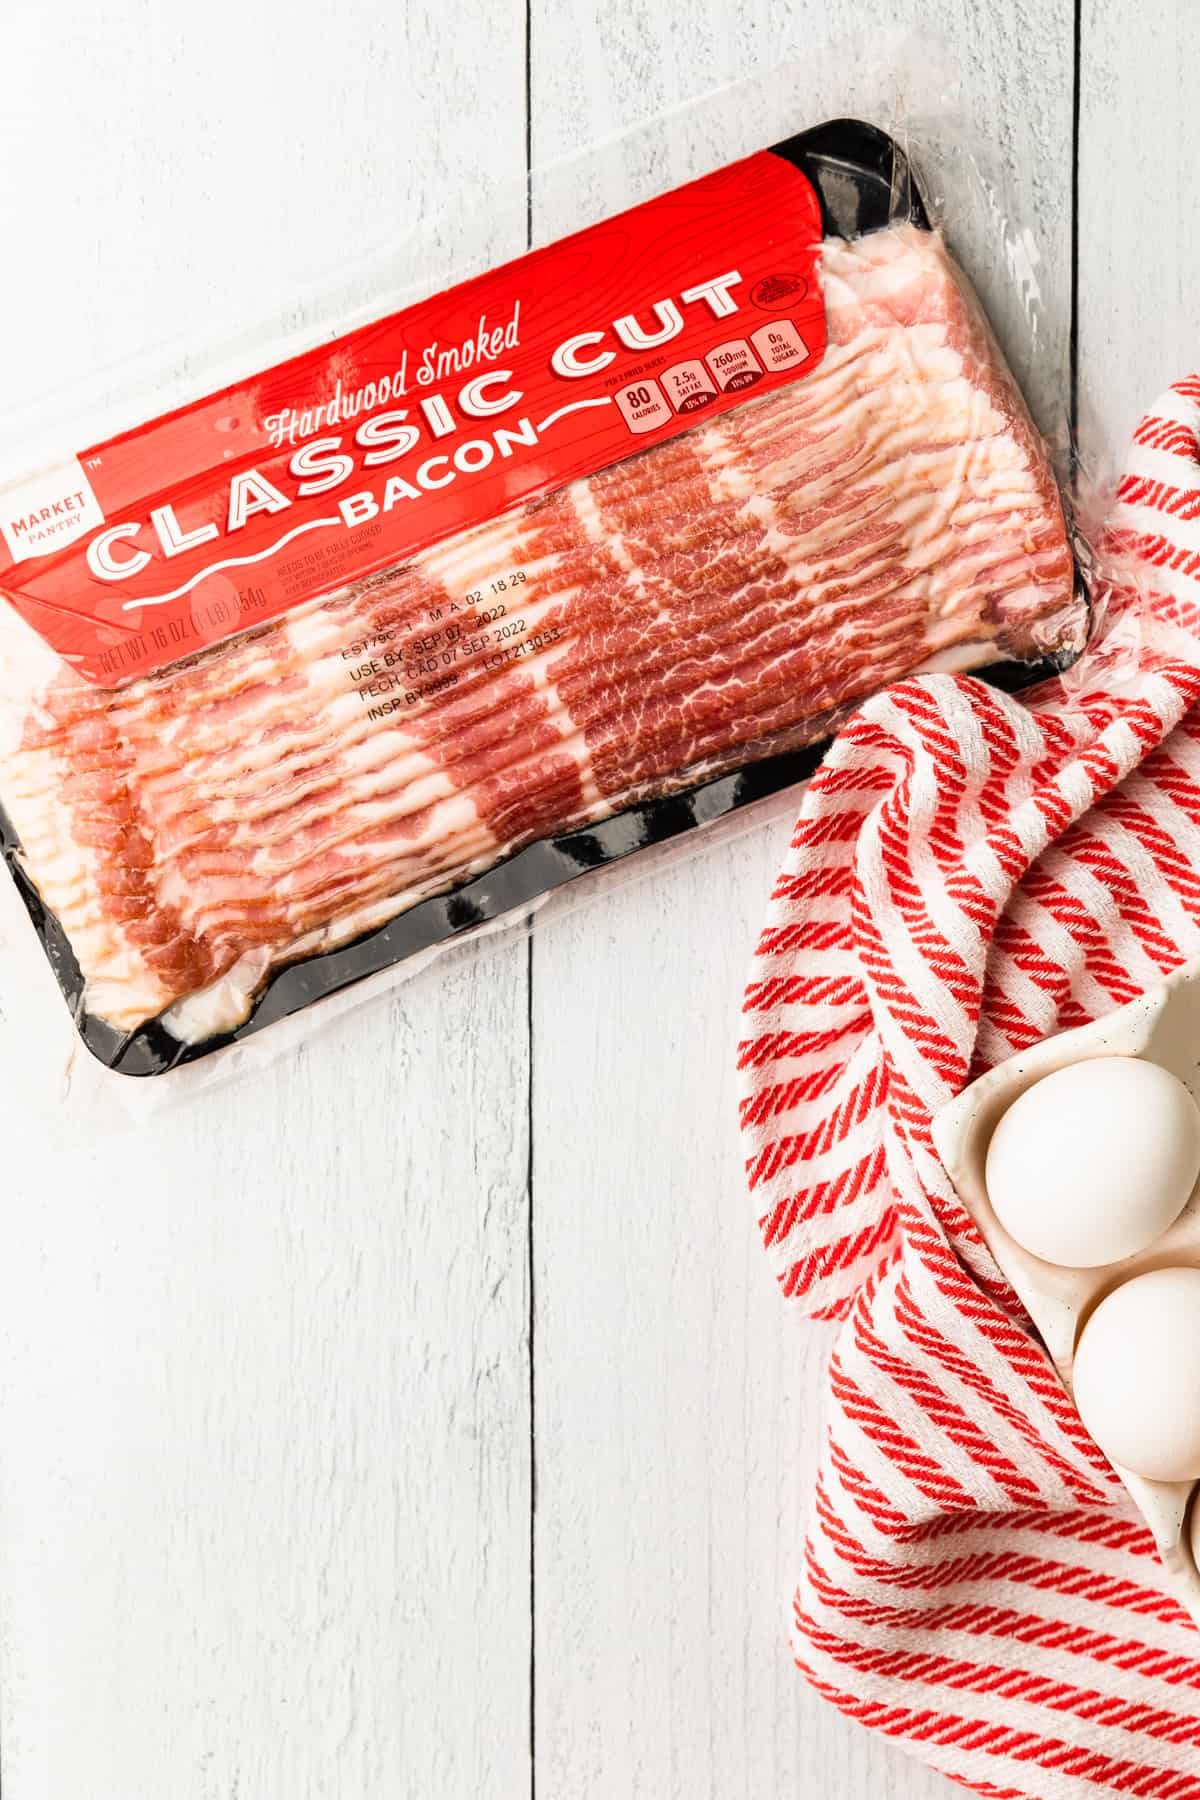 uncooked bacon in package